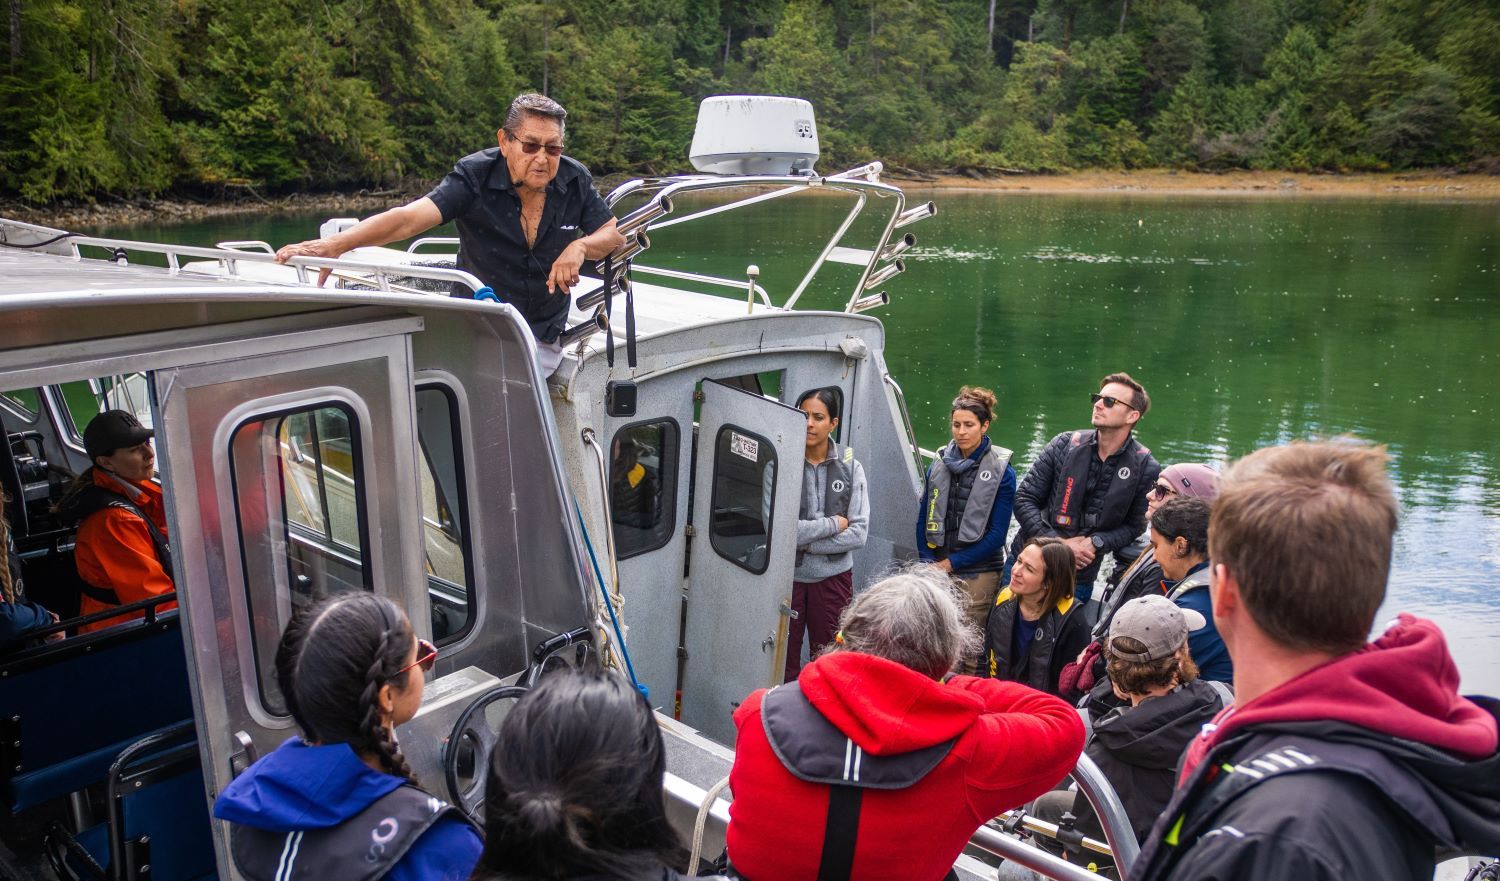 An older man stands between two boats, above a number of students who are in the boats and paying attention to what he's saying.